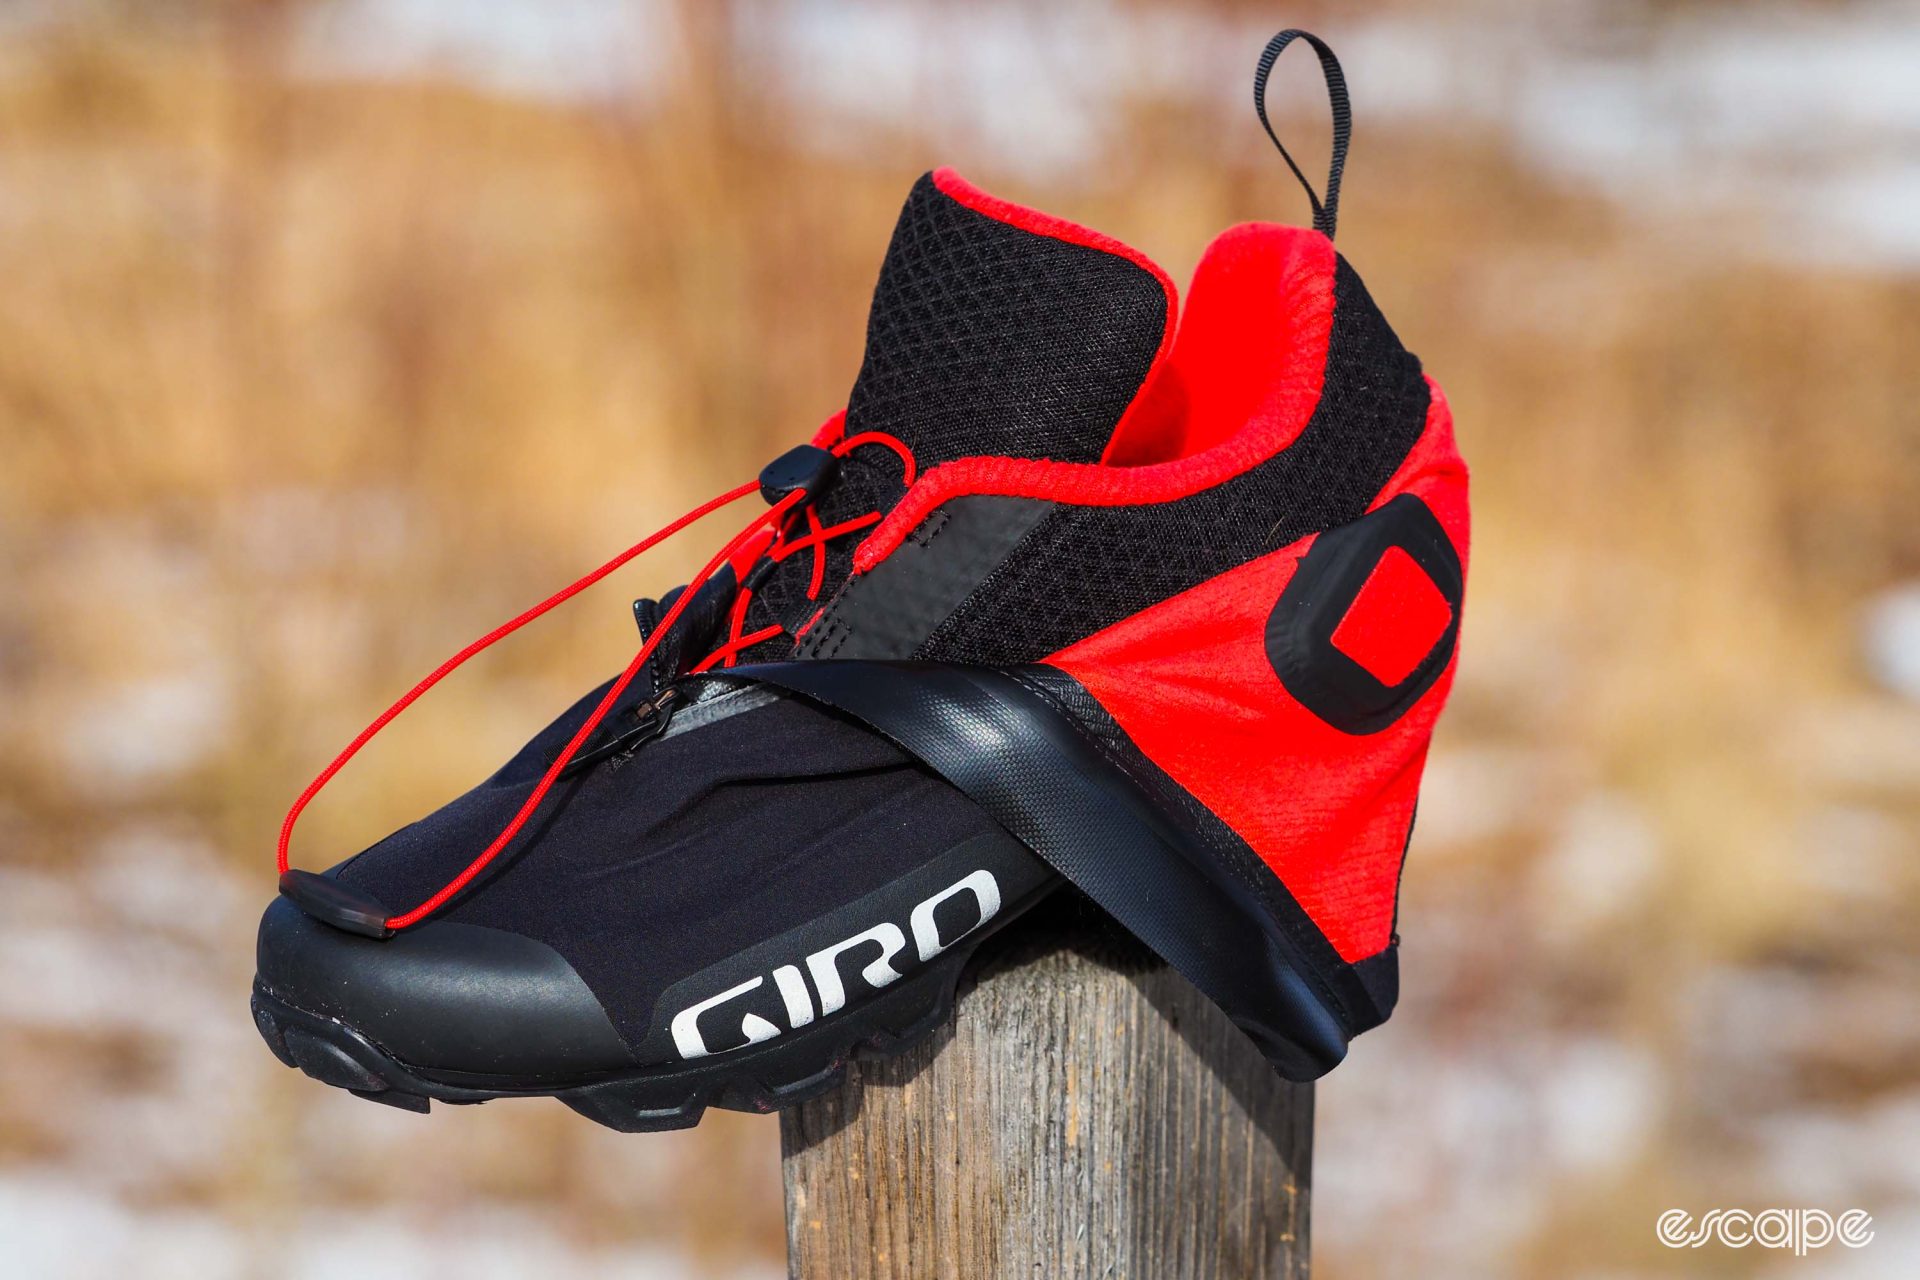 Giro Blaze winter cycling shoes outer cover pulled down